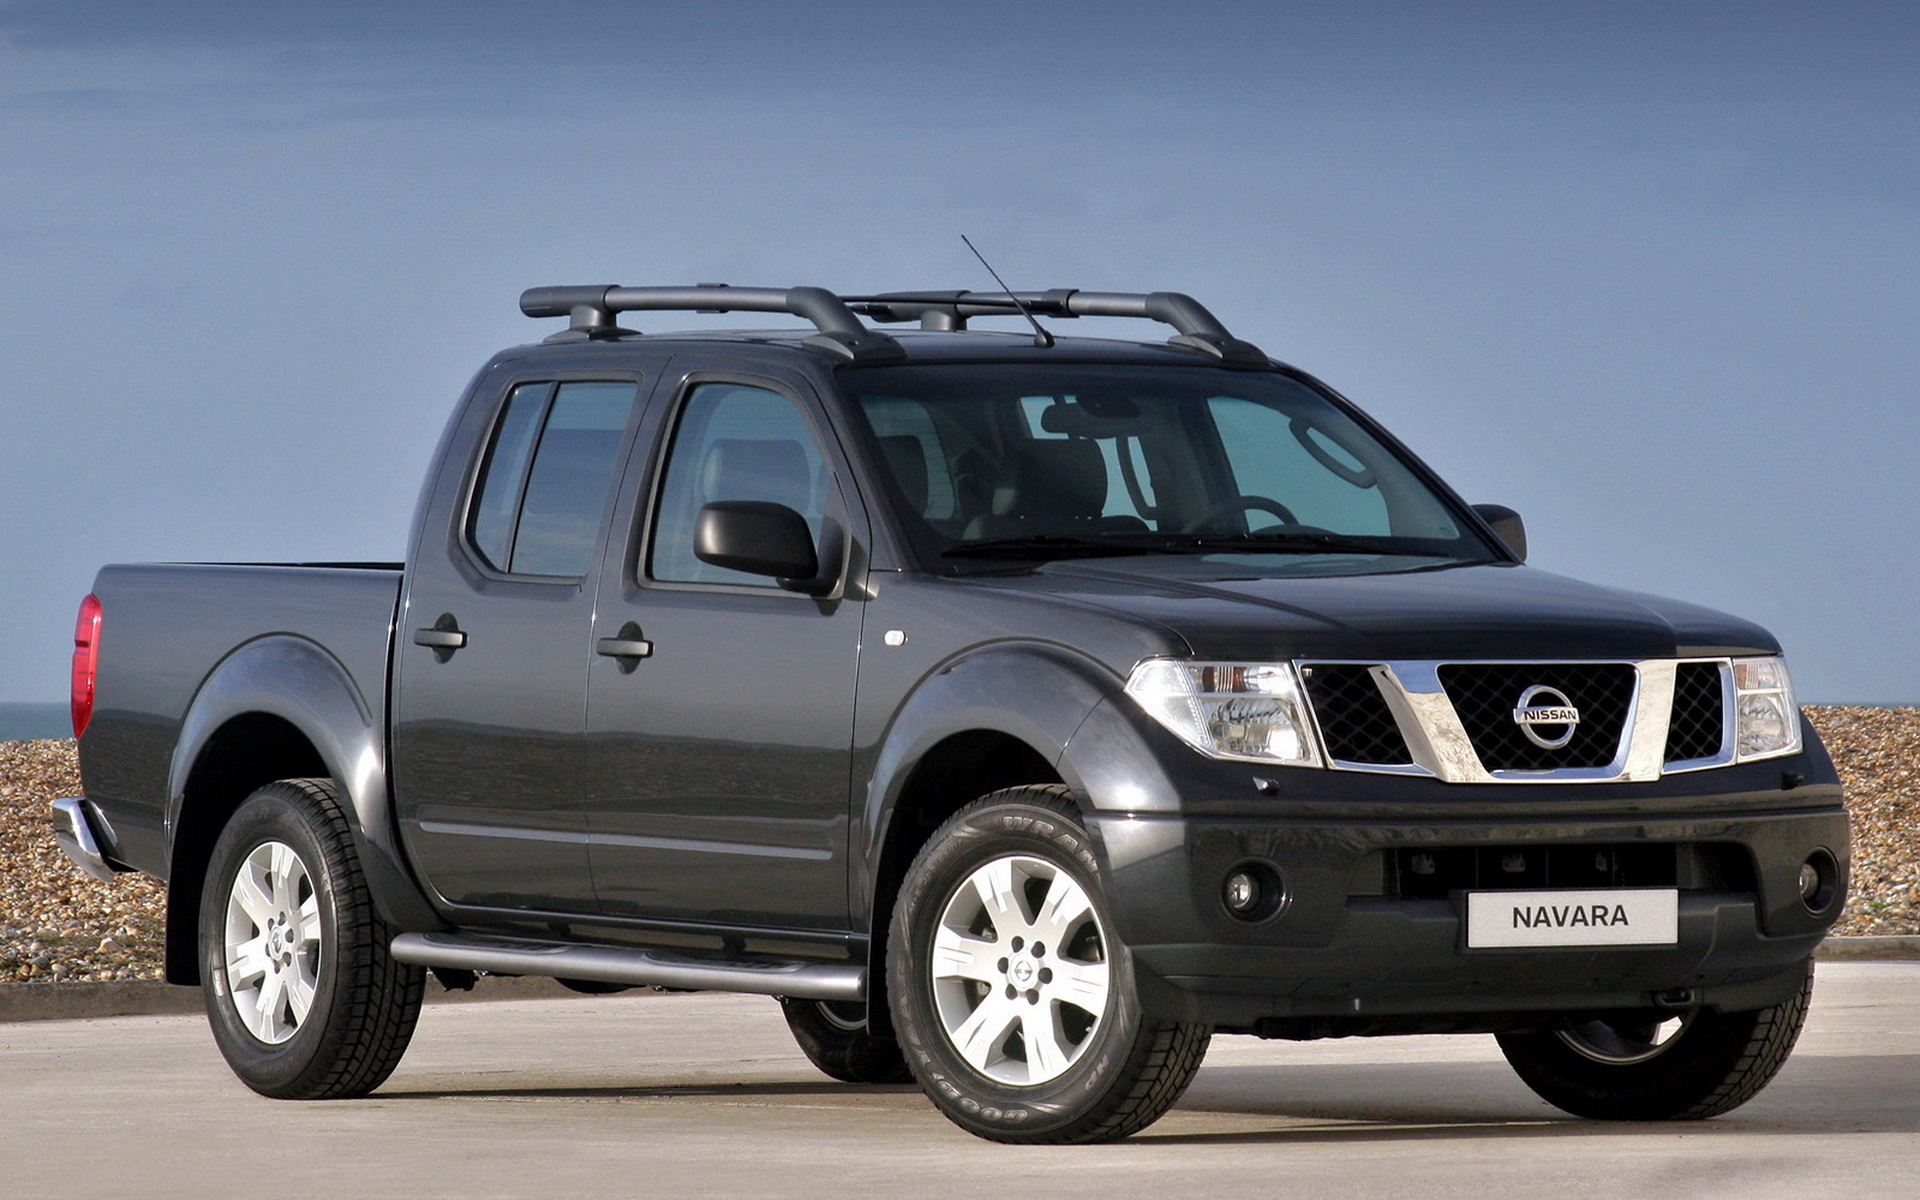 Nissan Navara wallpapers and images - wallpapers, pictures ...